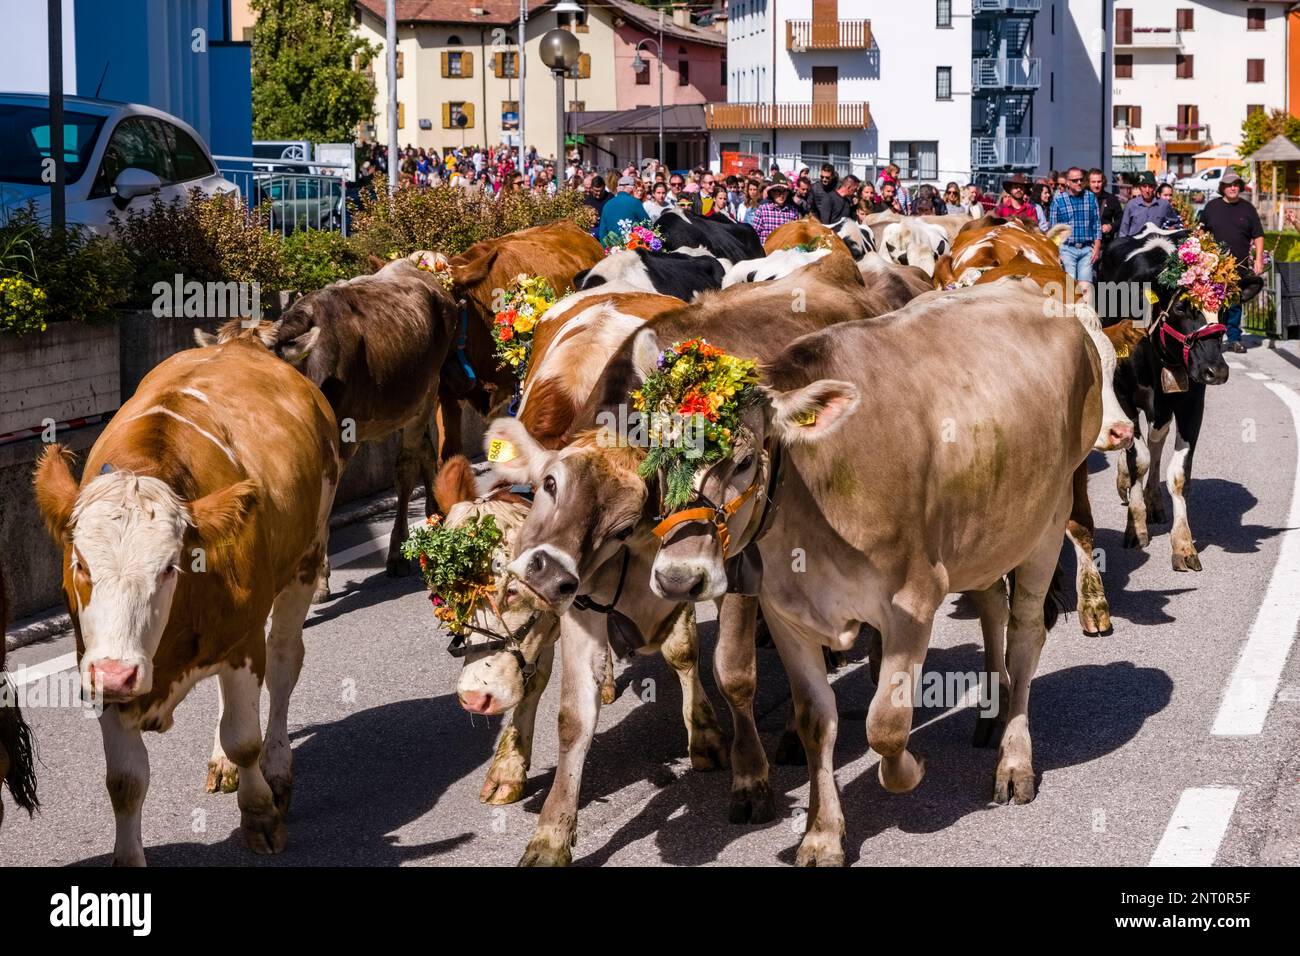 Cowherds guiding the cow herd through the village of Fai della Paganella during the Almabtrieb, the cattle drive from the mountain pasture. Stock Photo